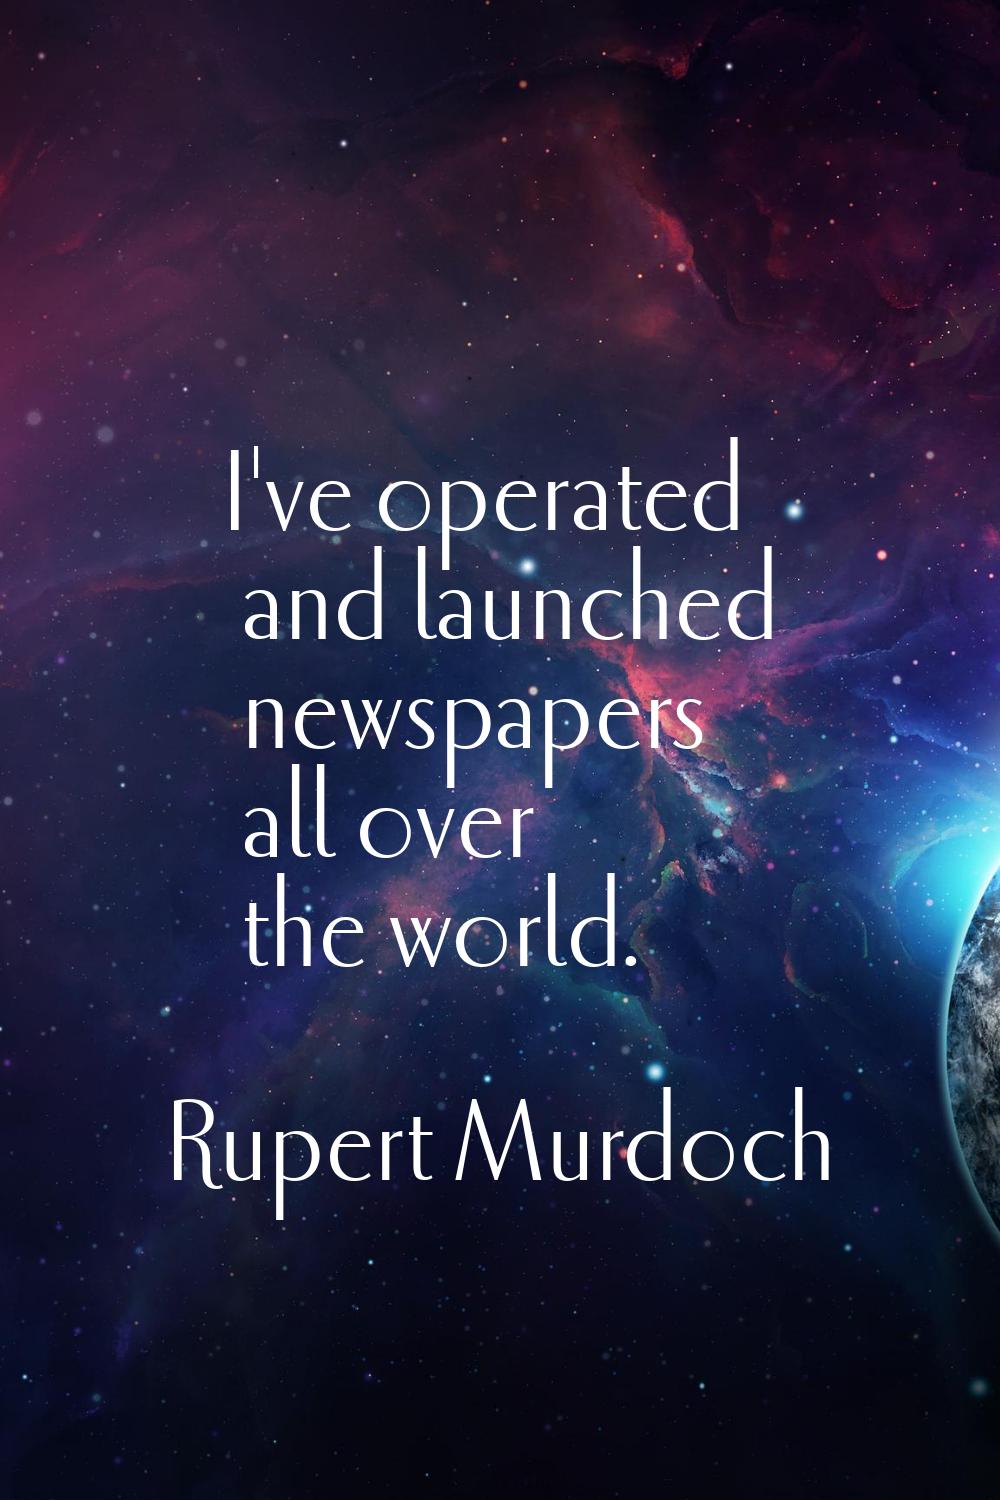 I've operated and launched newspapers all over the world.